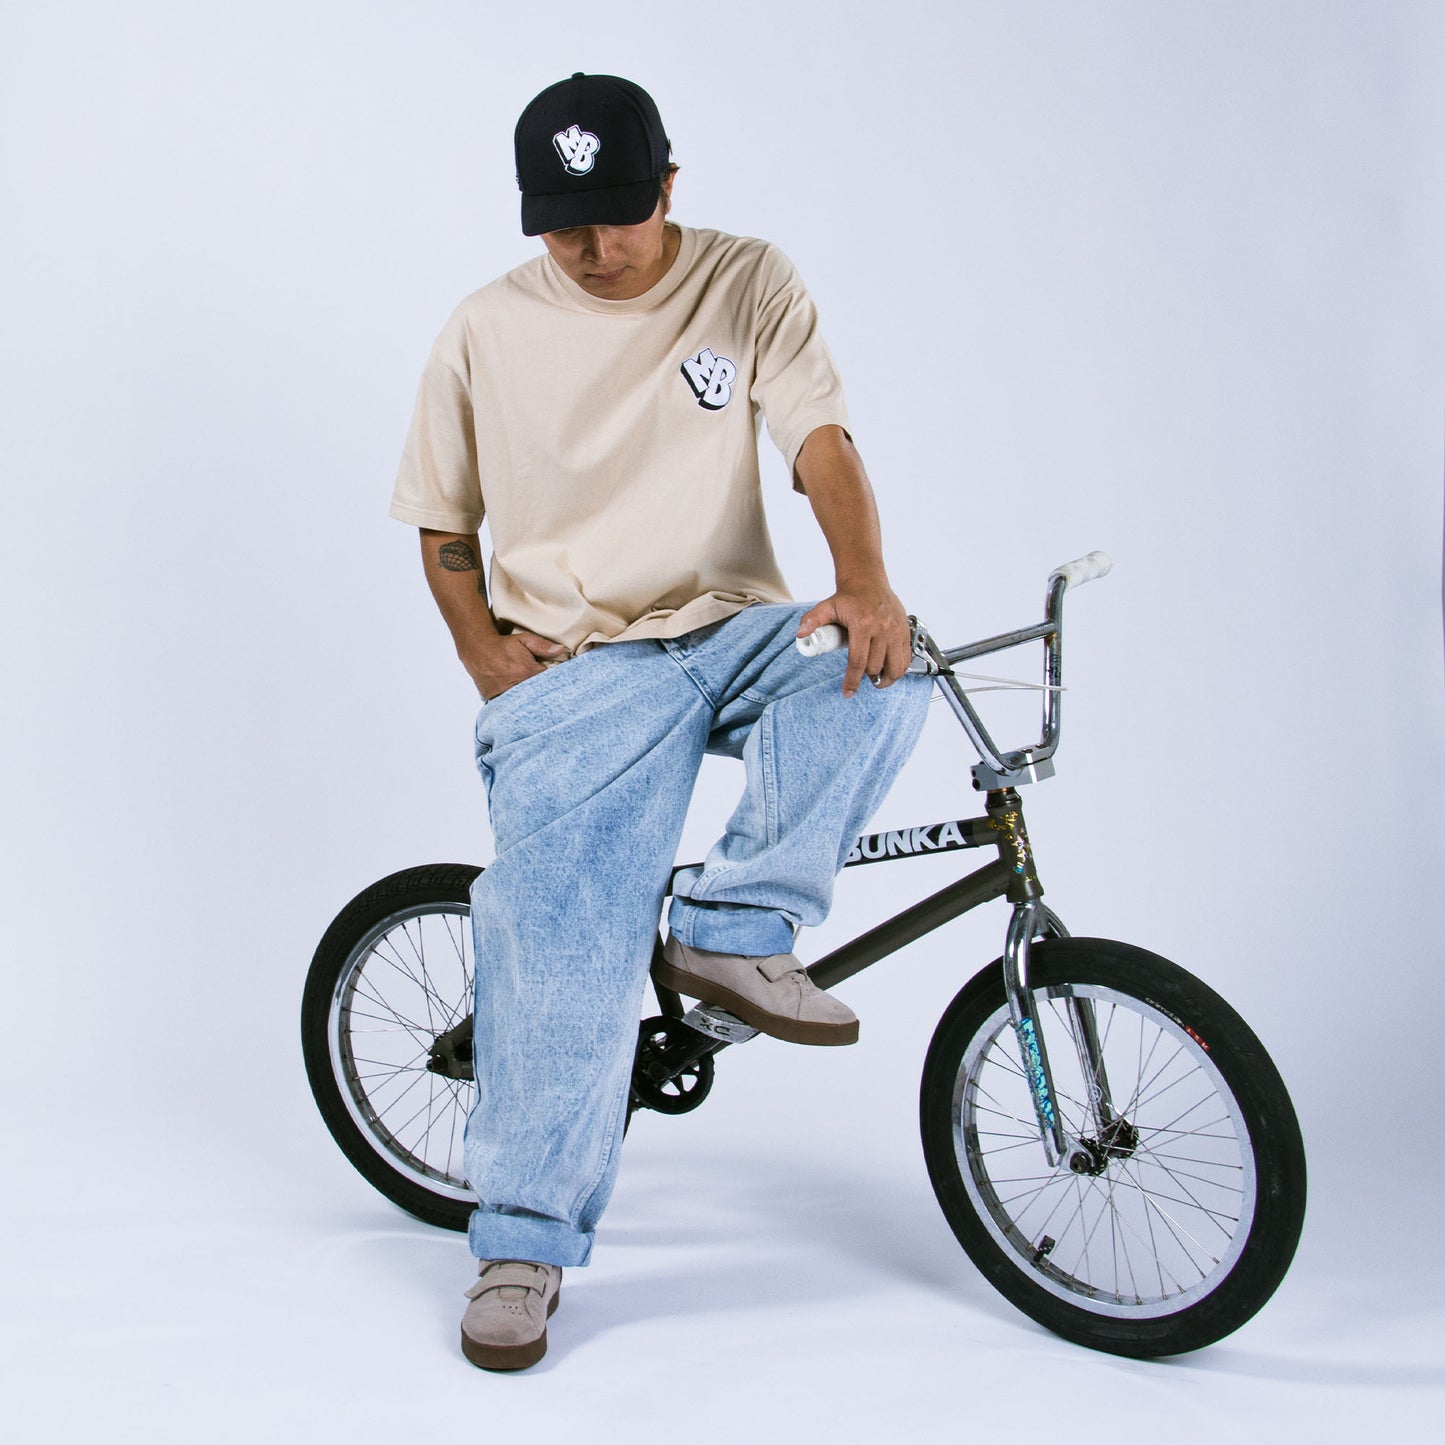 [FREE SHIPPING] MOTO-BUNKA X HEAVIES - Collaboration Jeans/Chemical Washed Light Blue